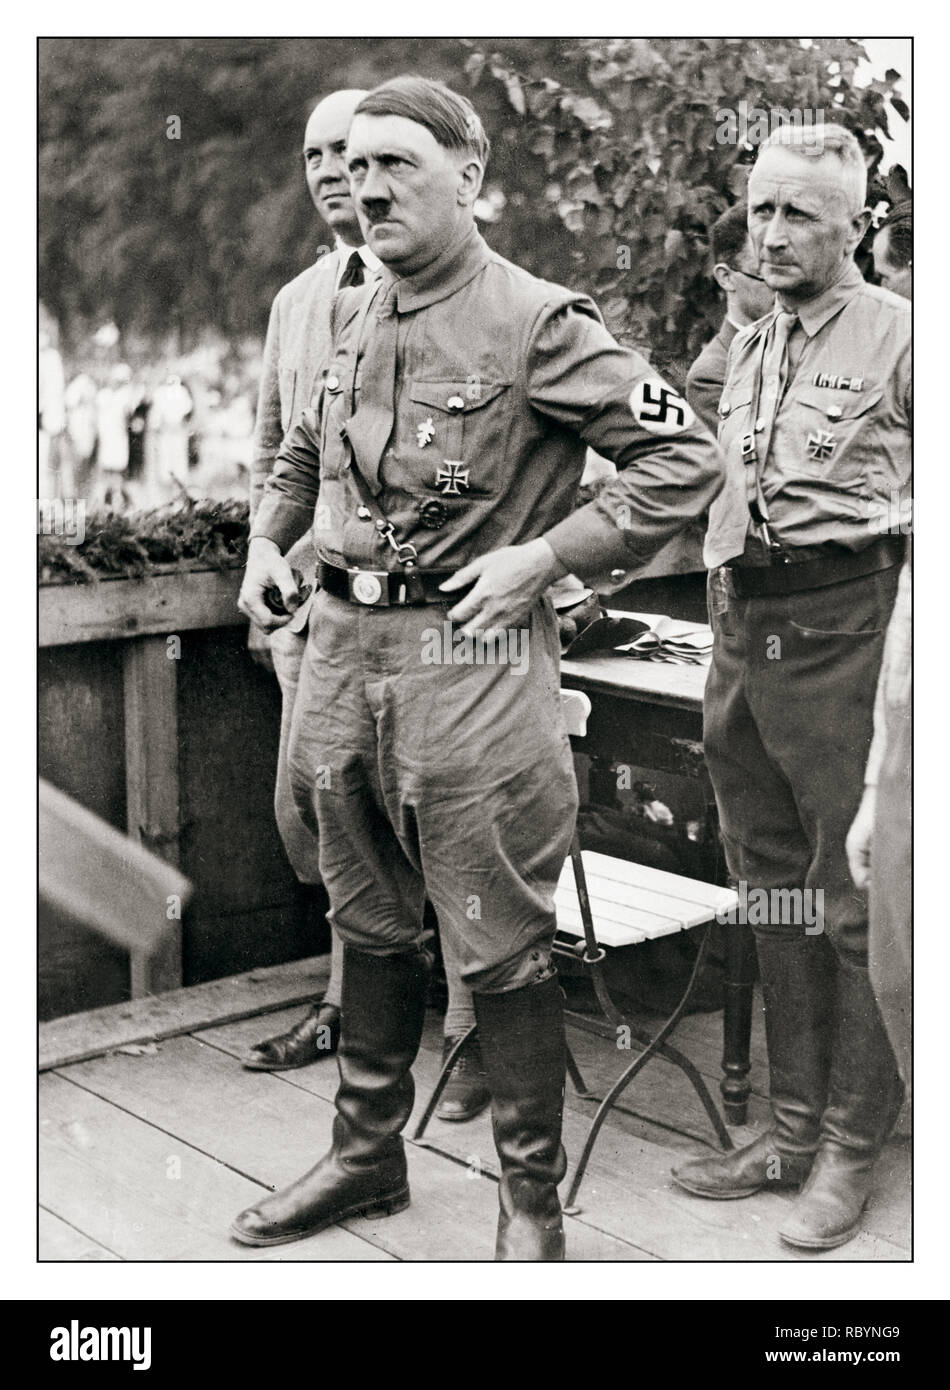 ARCHIVE 1932 Adolf Hitler in NSDAP uniform with jackboots wearing a swastika armband at a political rally to decide the Germany Reich presidential elections Hitler subsequently became Chancellor of Germany Stock Photo